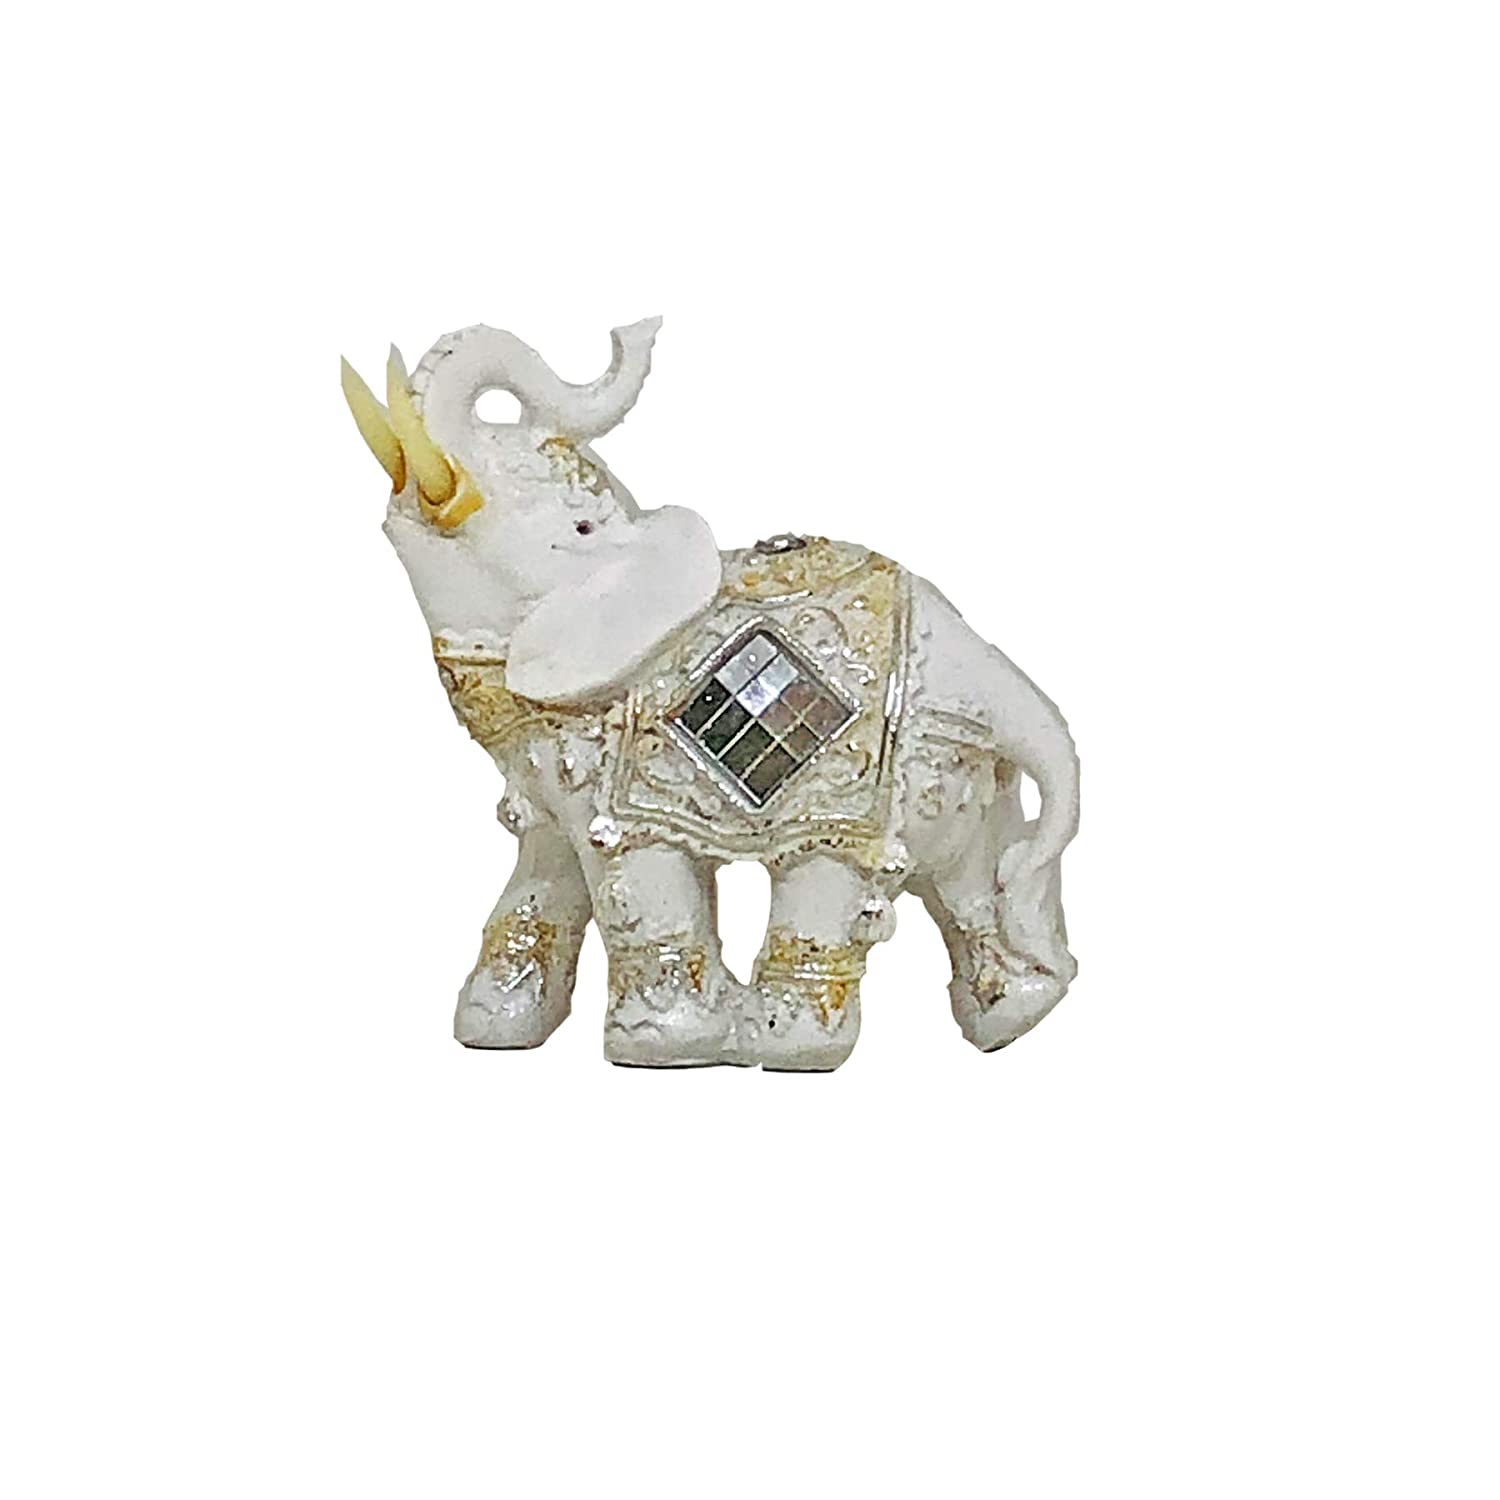 Resin Craft Feng Shui Bejeweled Trunk Up Mini Elephant Figurine Showpiece for Home Decor | Table Decor | Gifting Ideas | Housewarming Gifts (Height : 10 Cms.) 